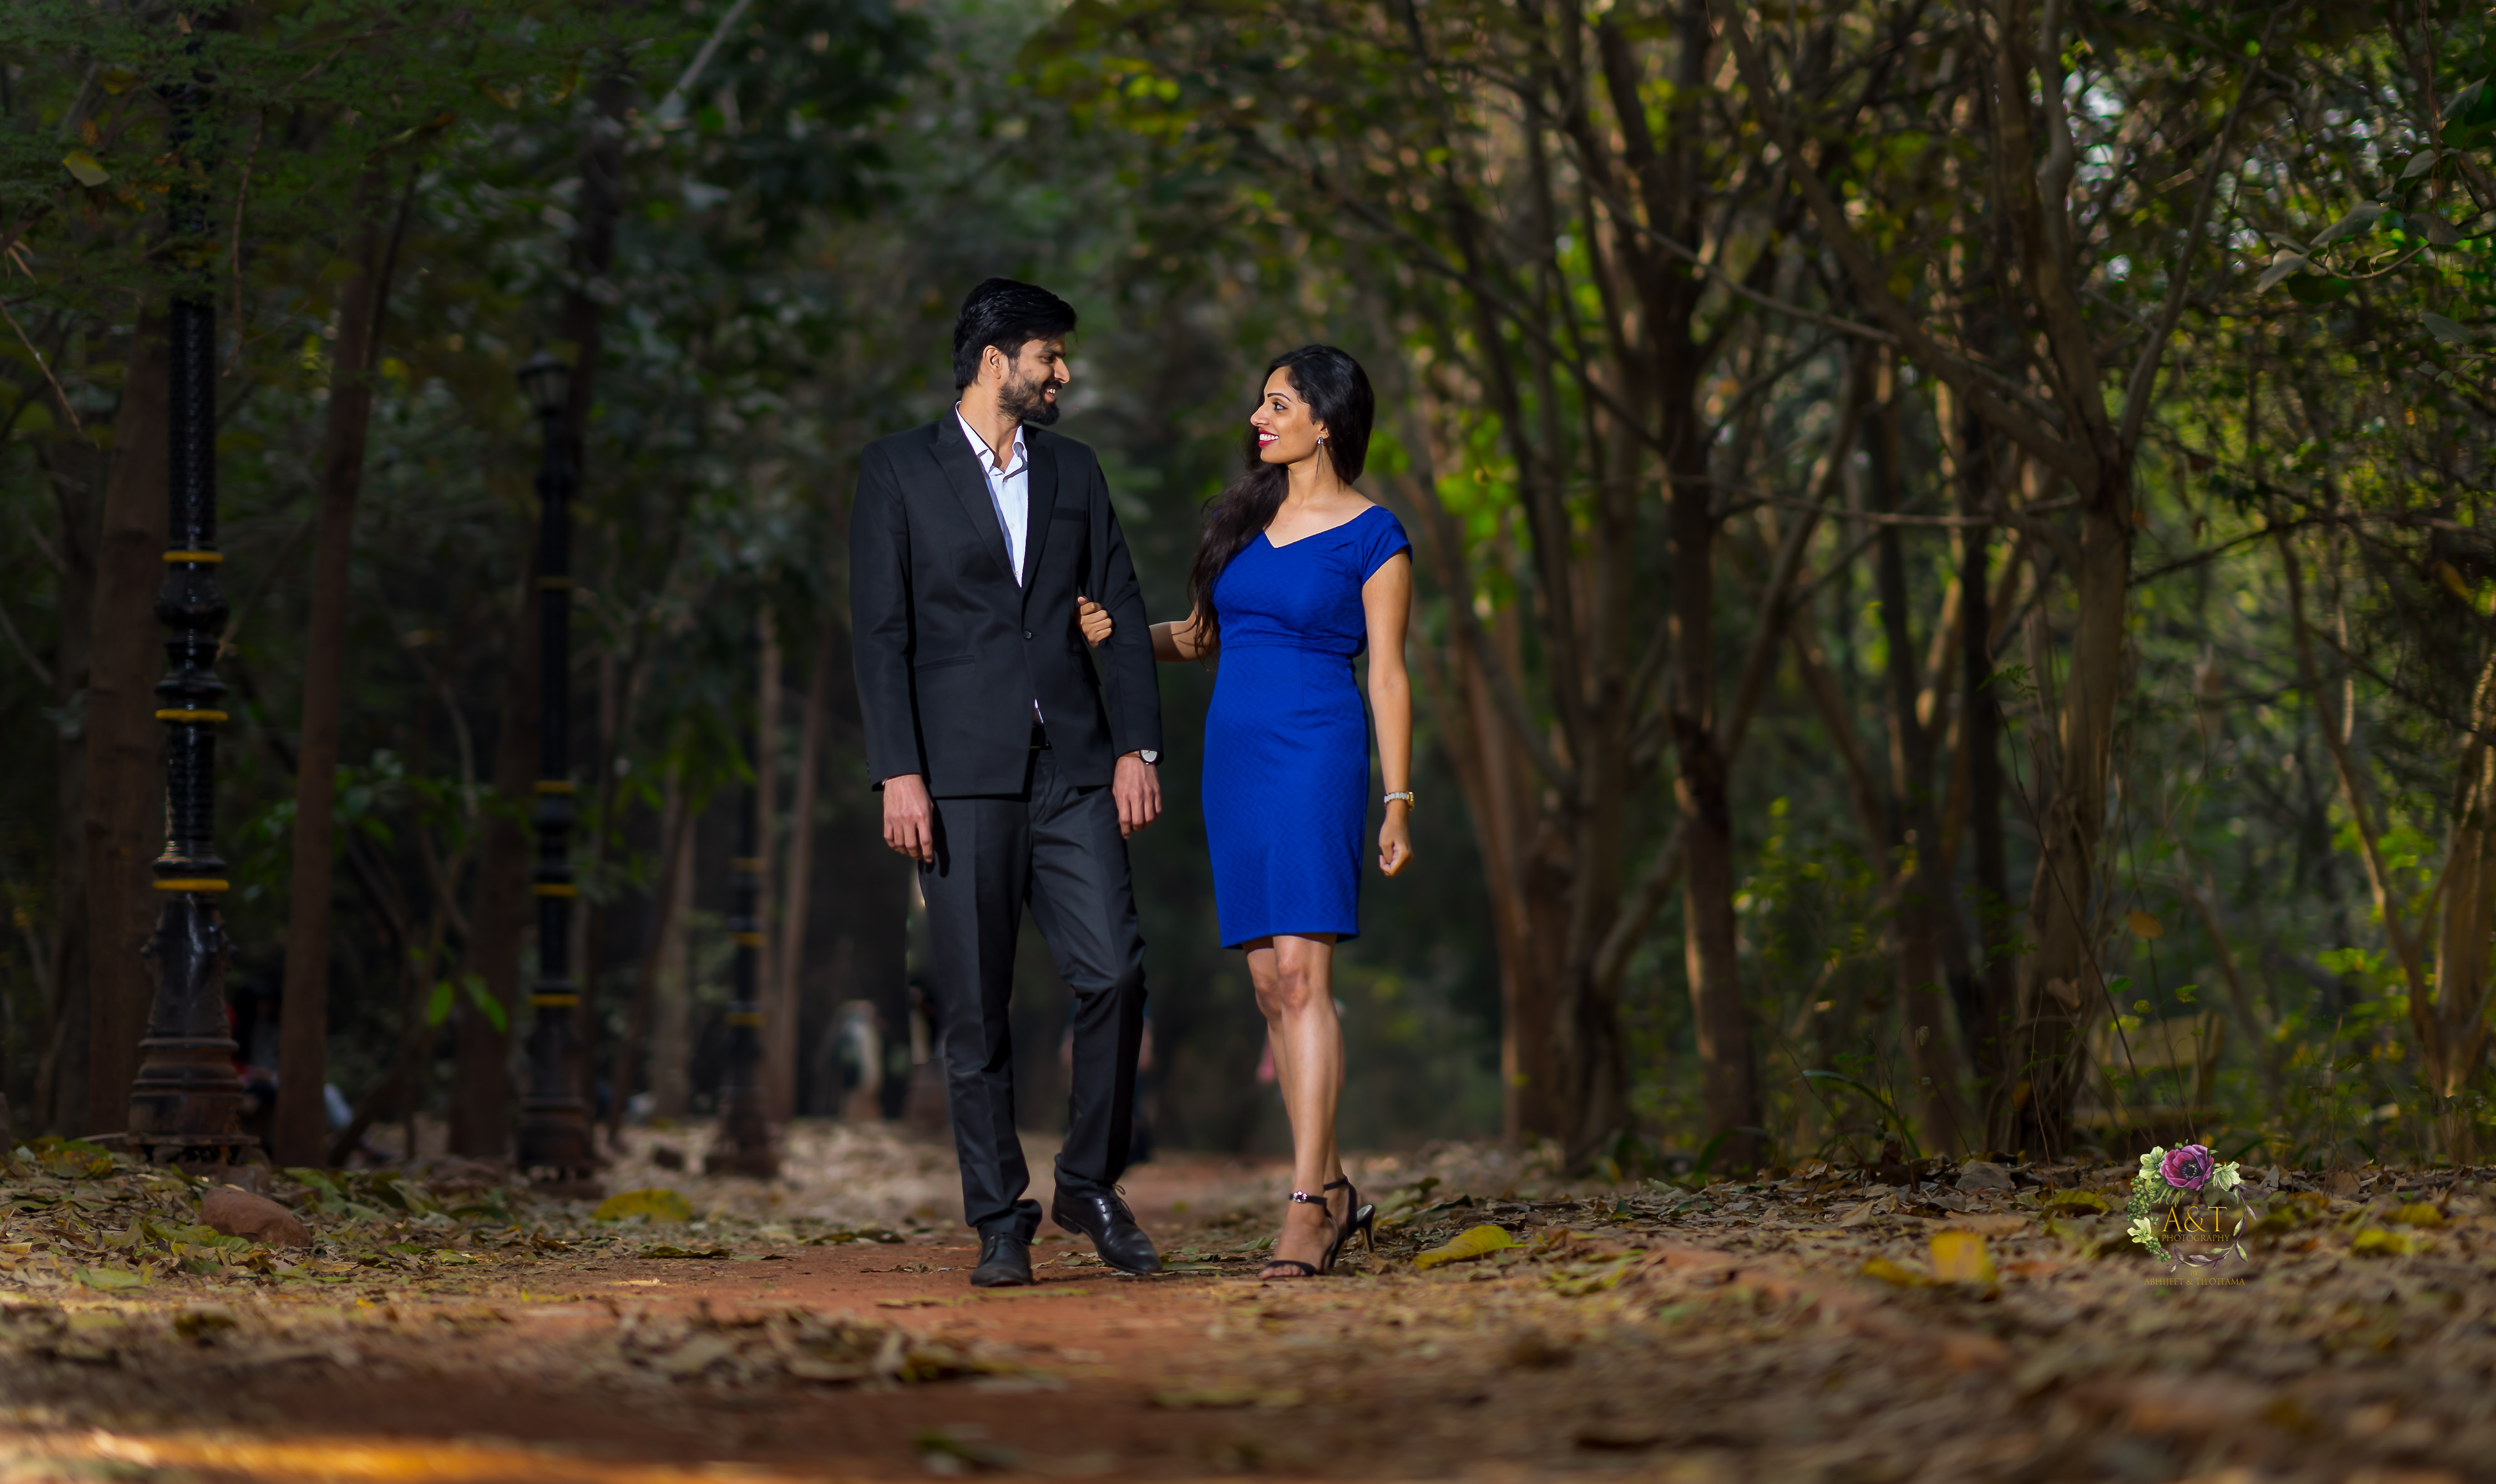 Heena & Vikas Walking on a Pathway for their best pre-wedding photoshoot in Pune